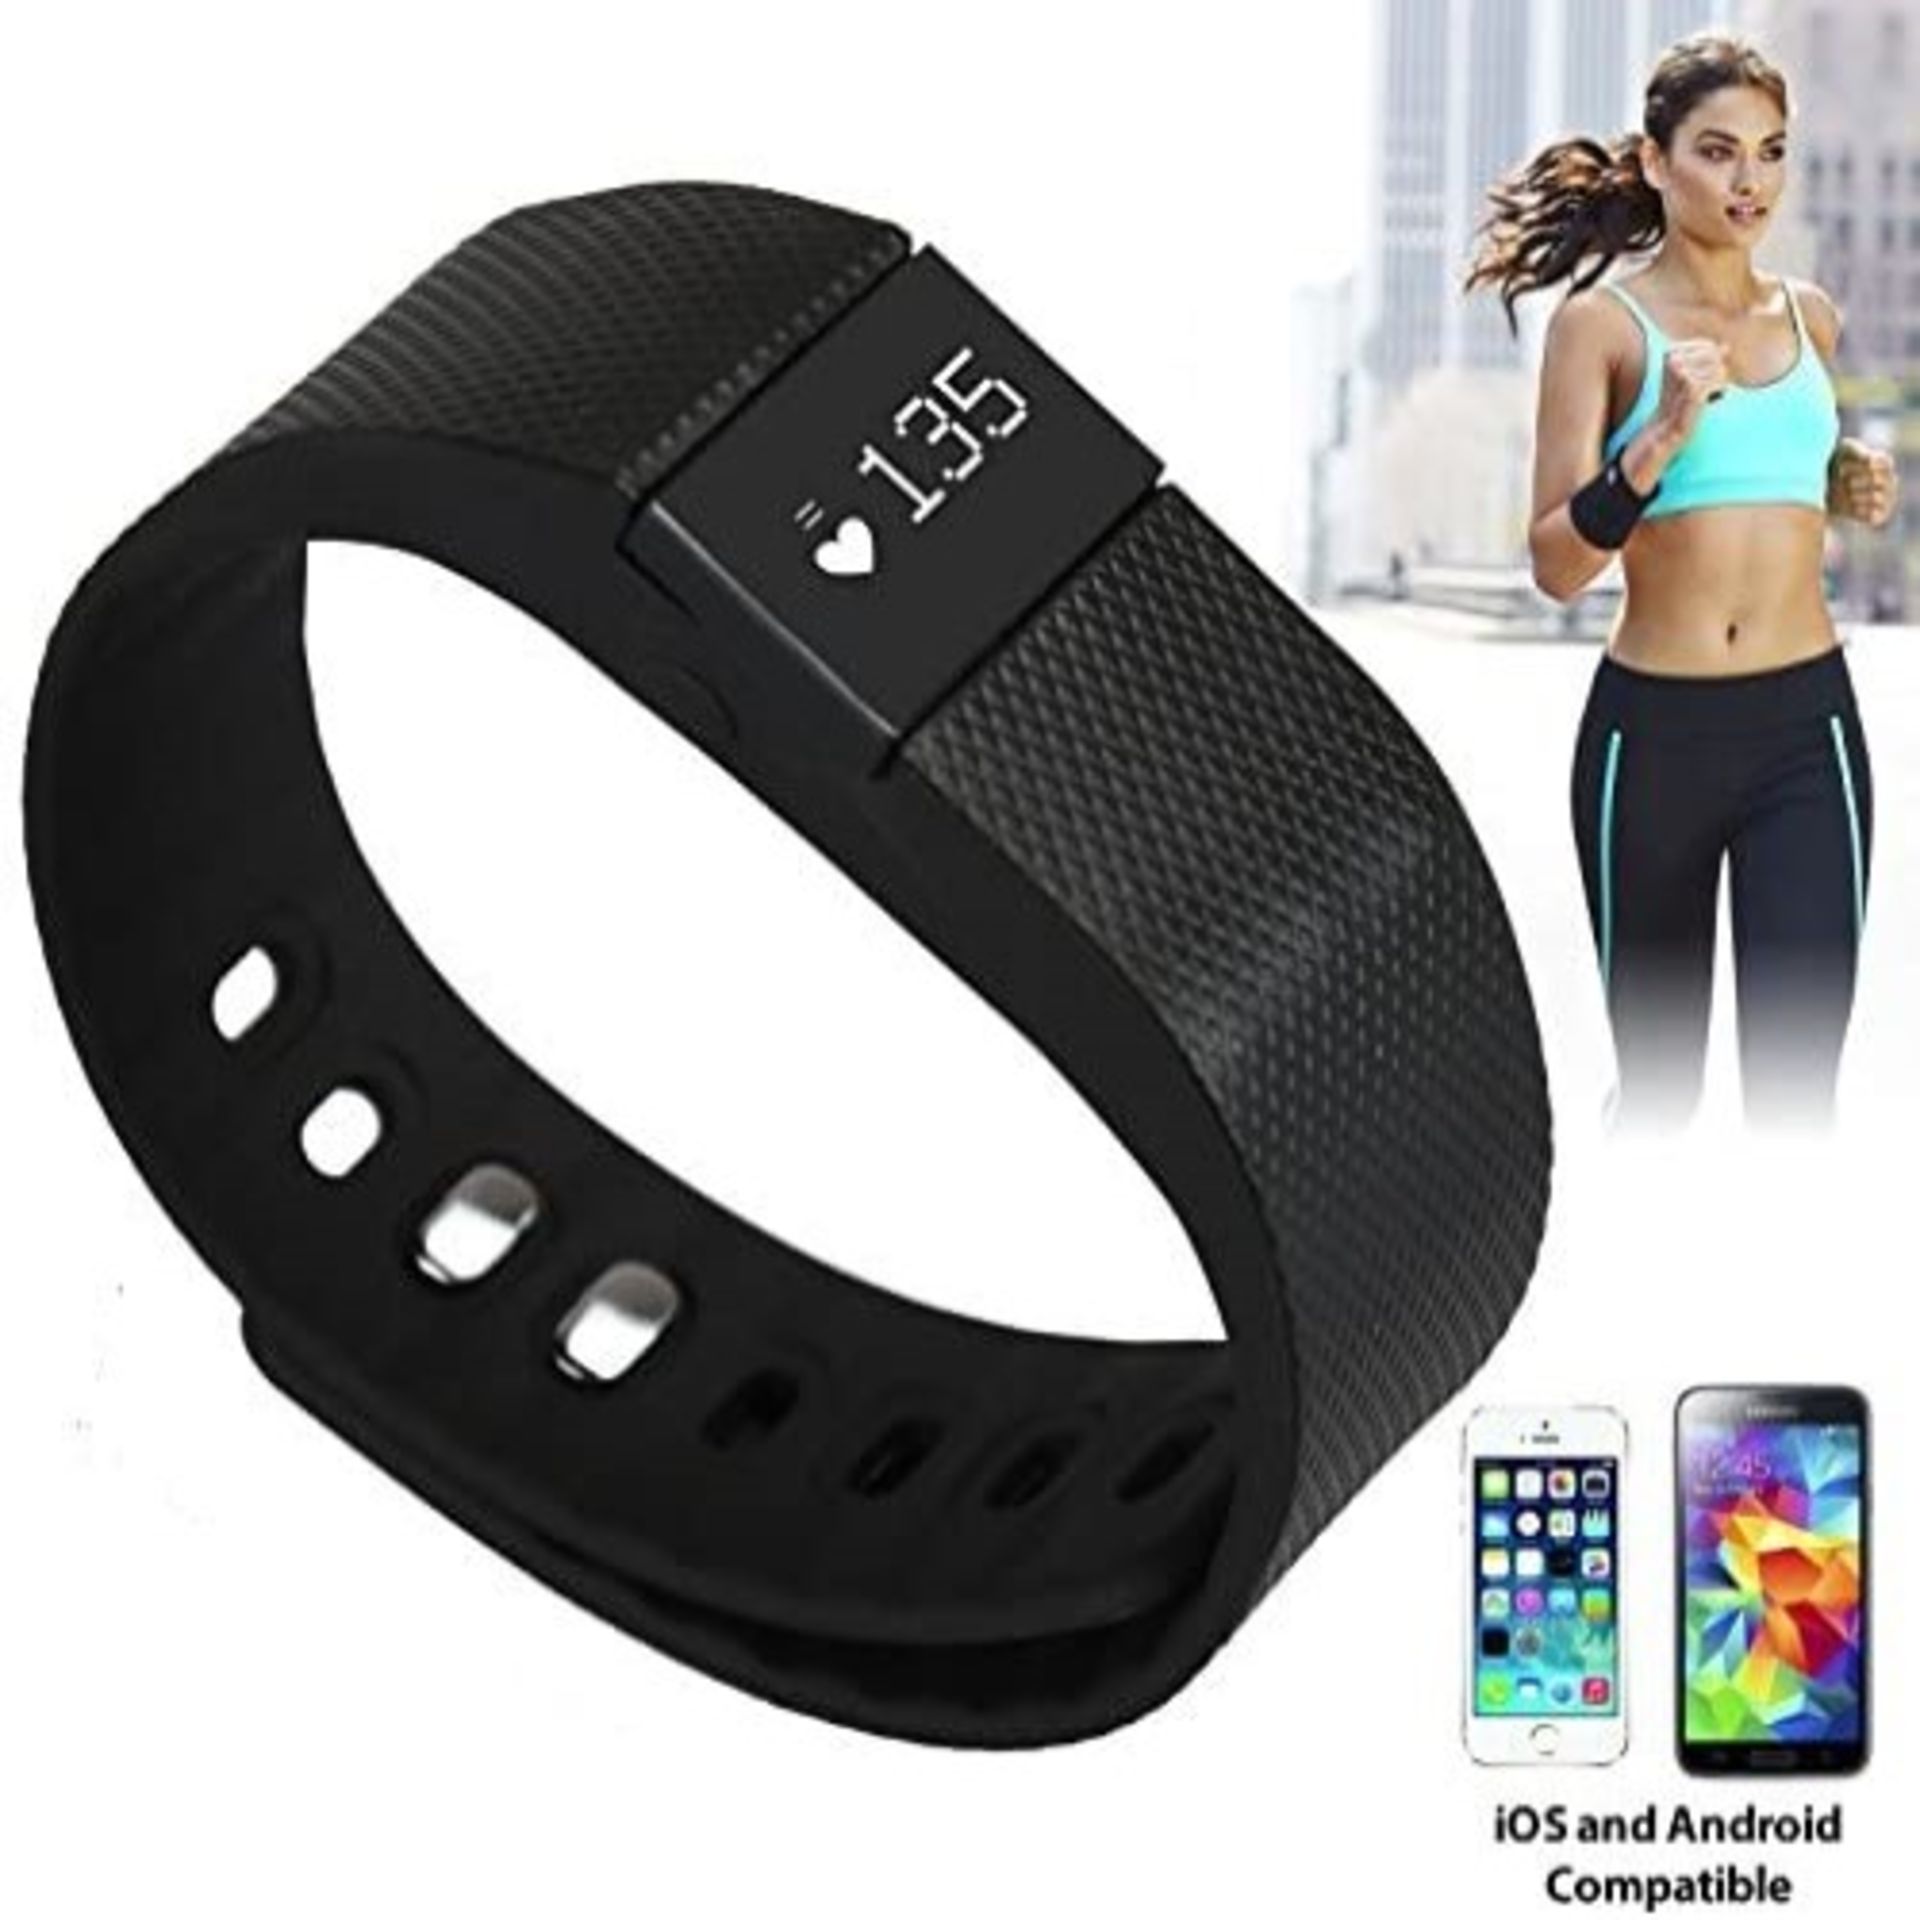 RRP 25.00 ea 10 x Falcon Smart Sports Watch, Sleep Monitor, Pedometer SummaryCompatible with both